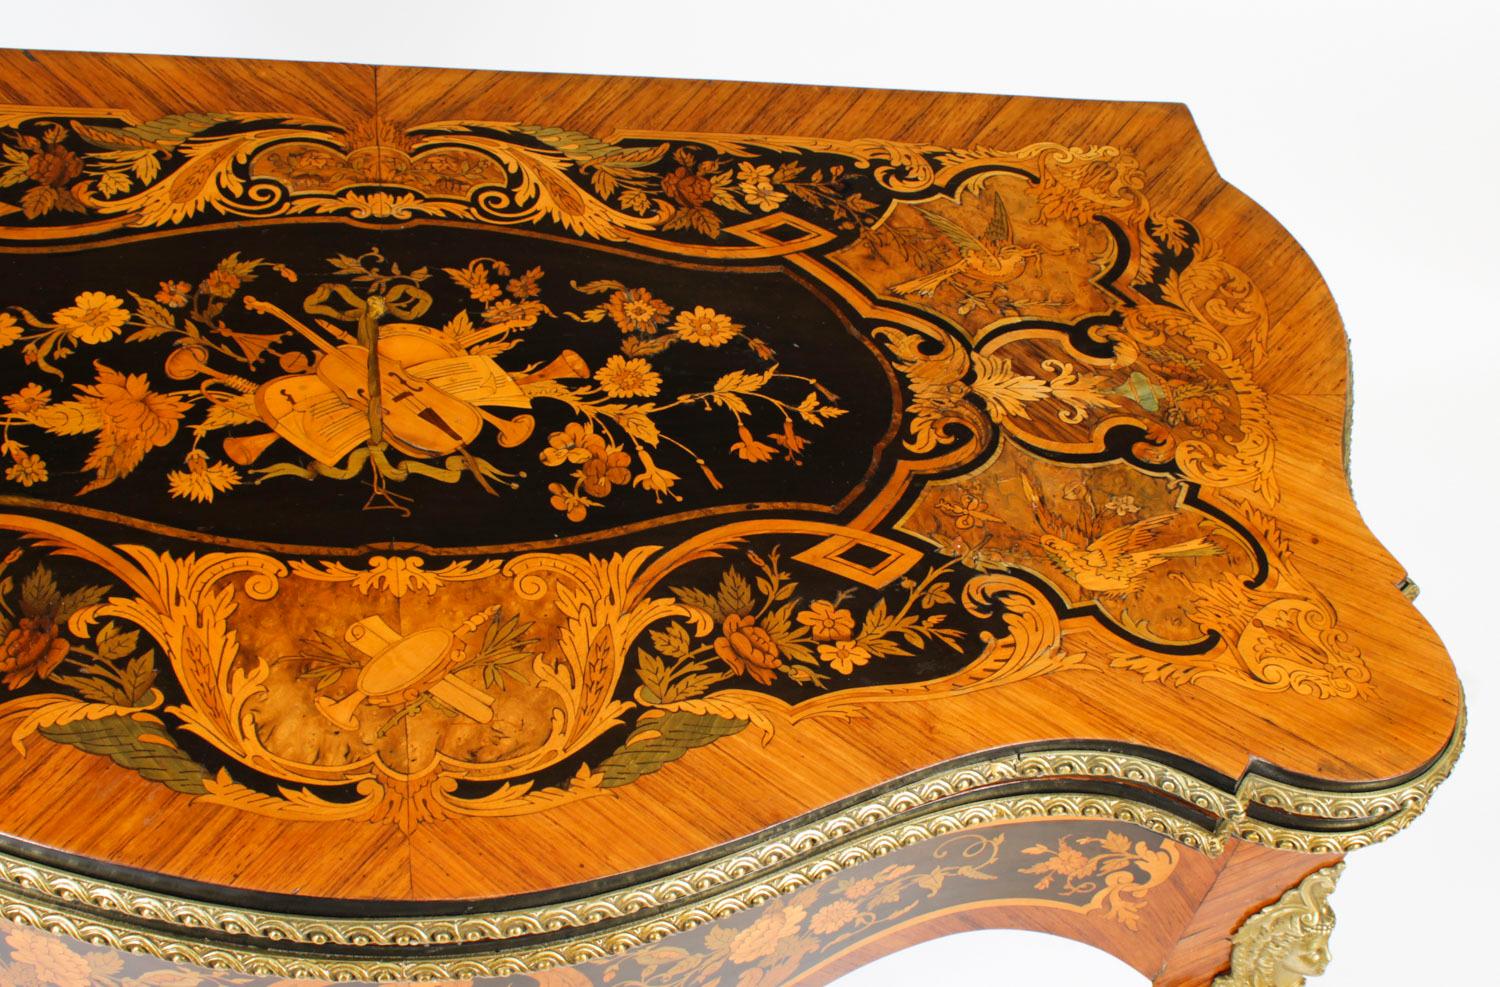 English Antique French Louis Revival Floral Marquetry Card Table 19th C